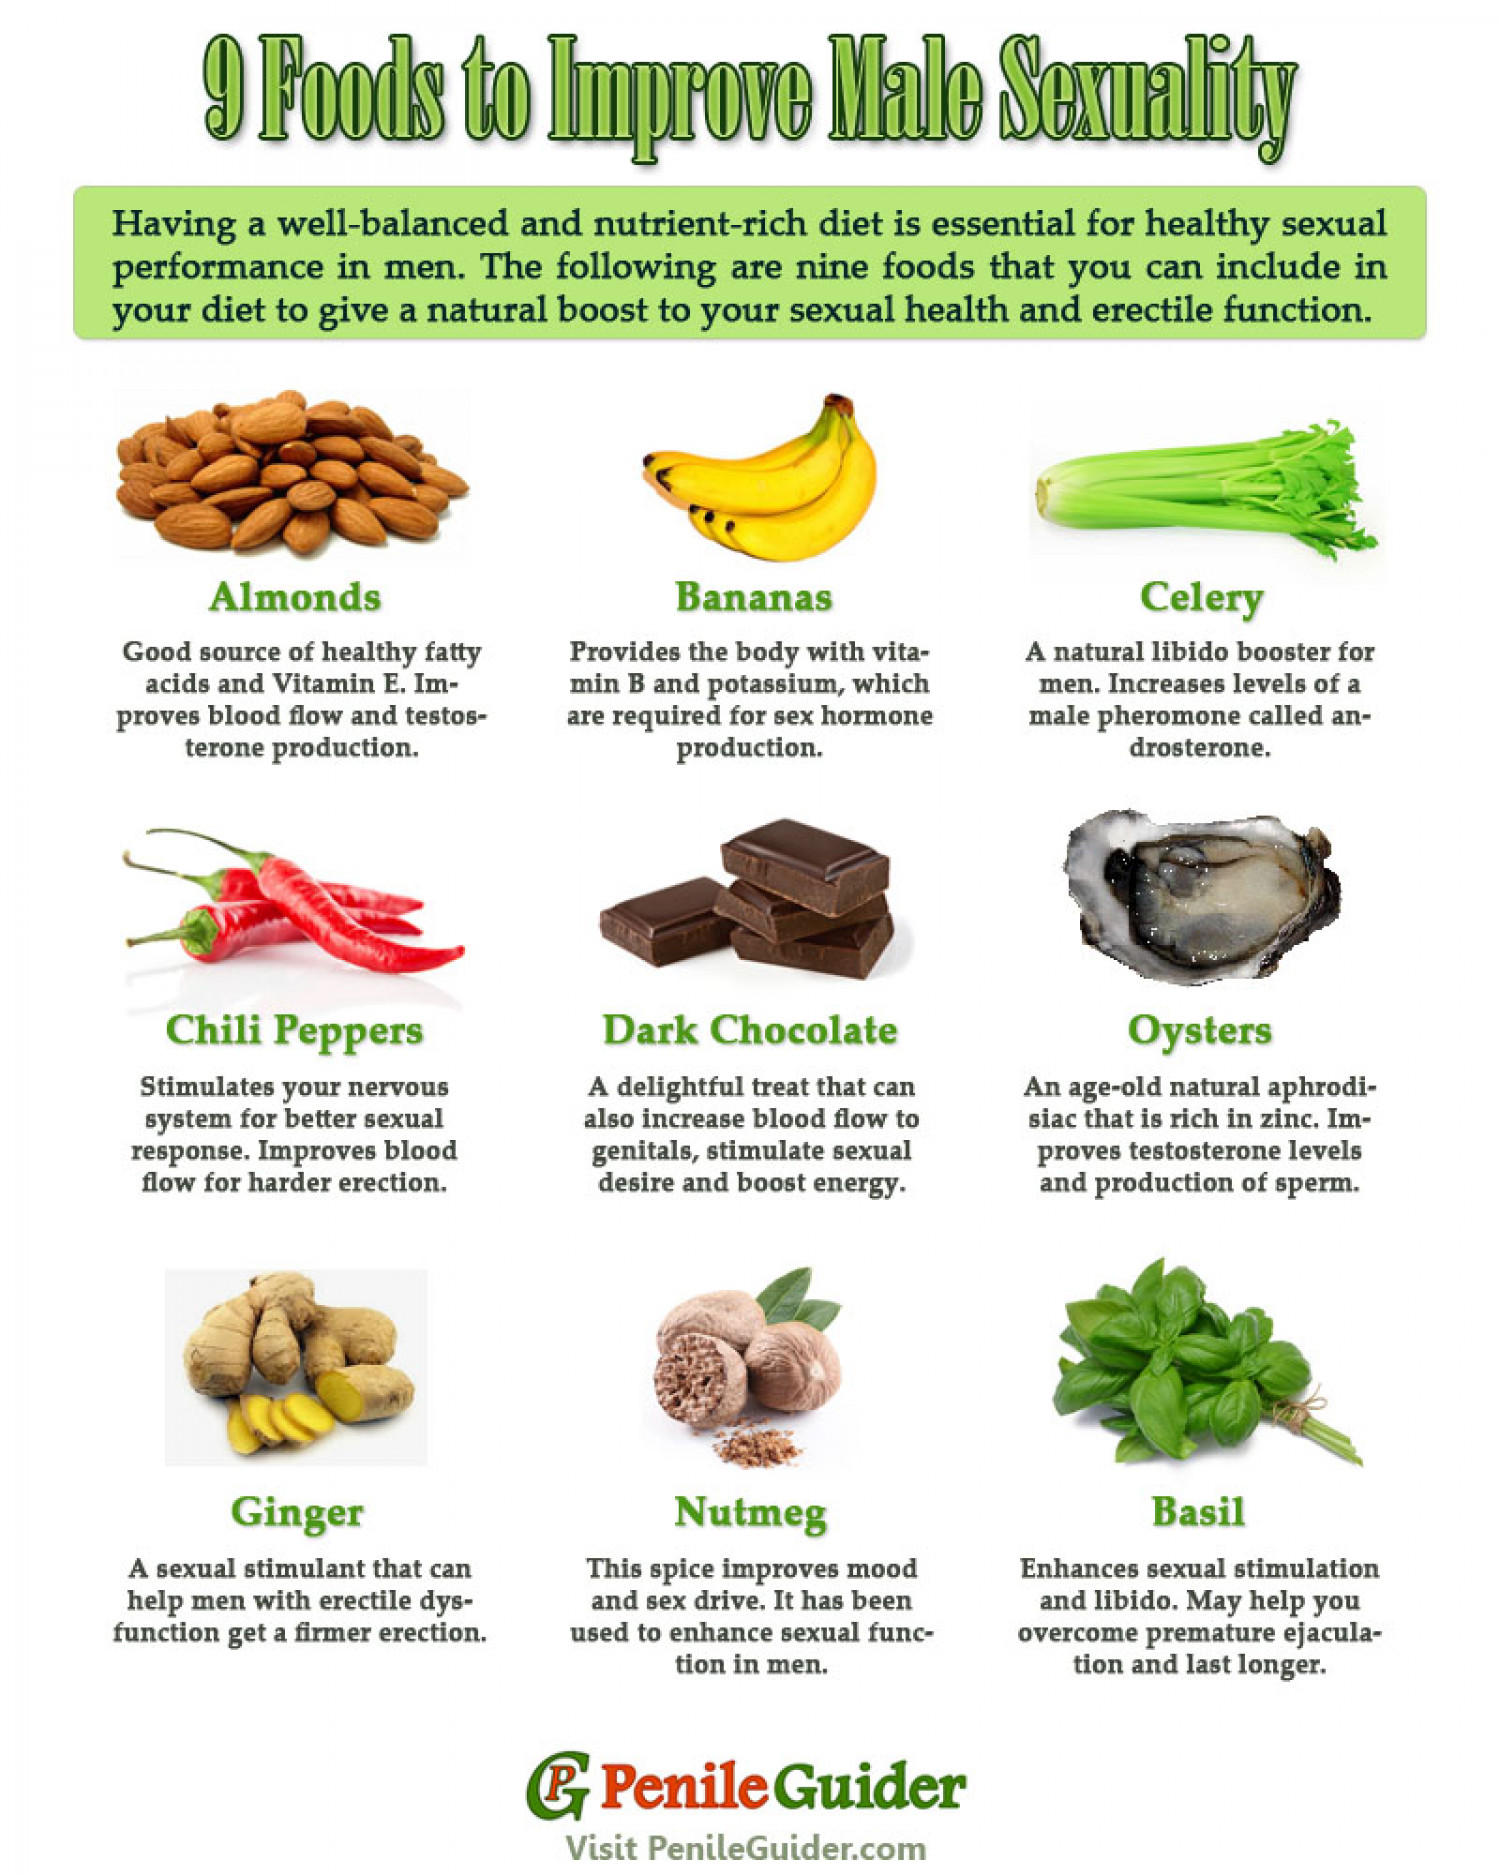 For Men 9 Foods to Add to Your Diet to Improve Sexuality